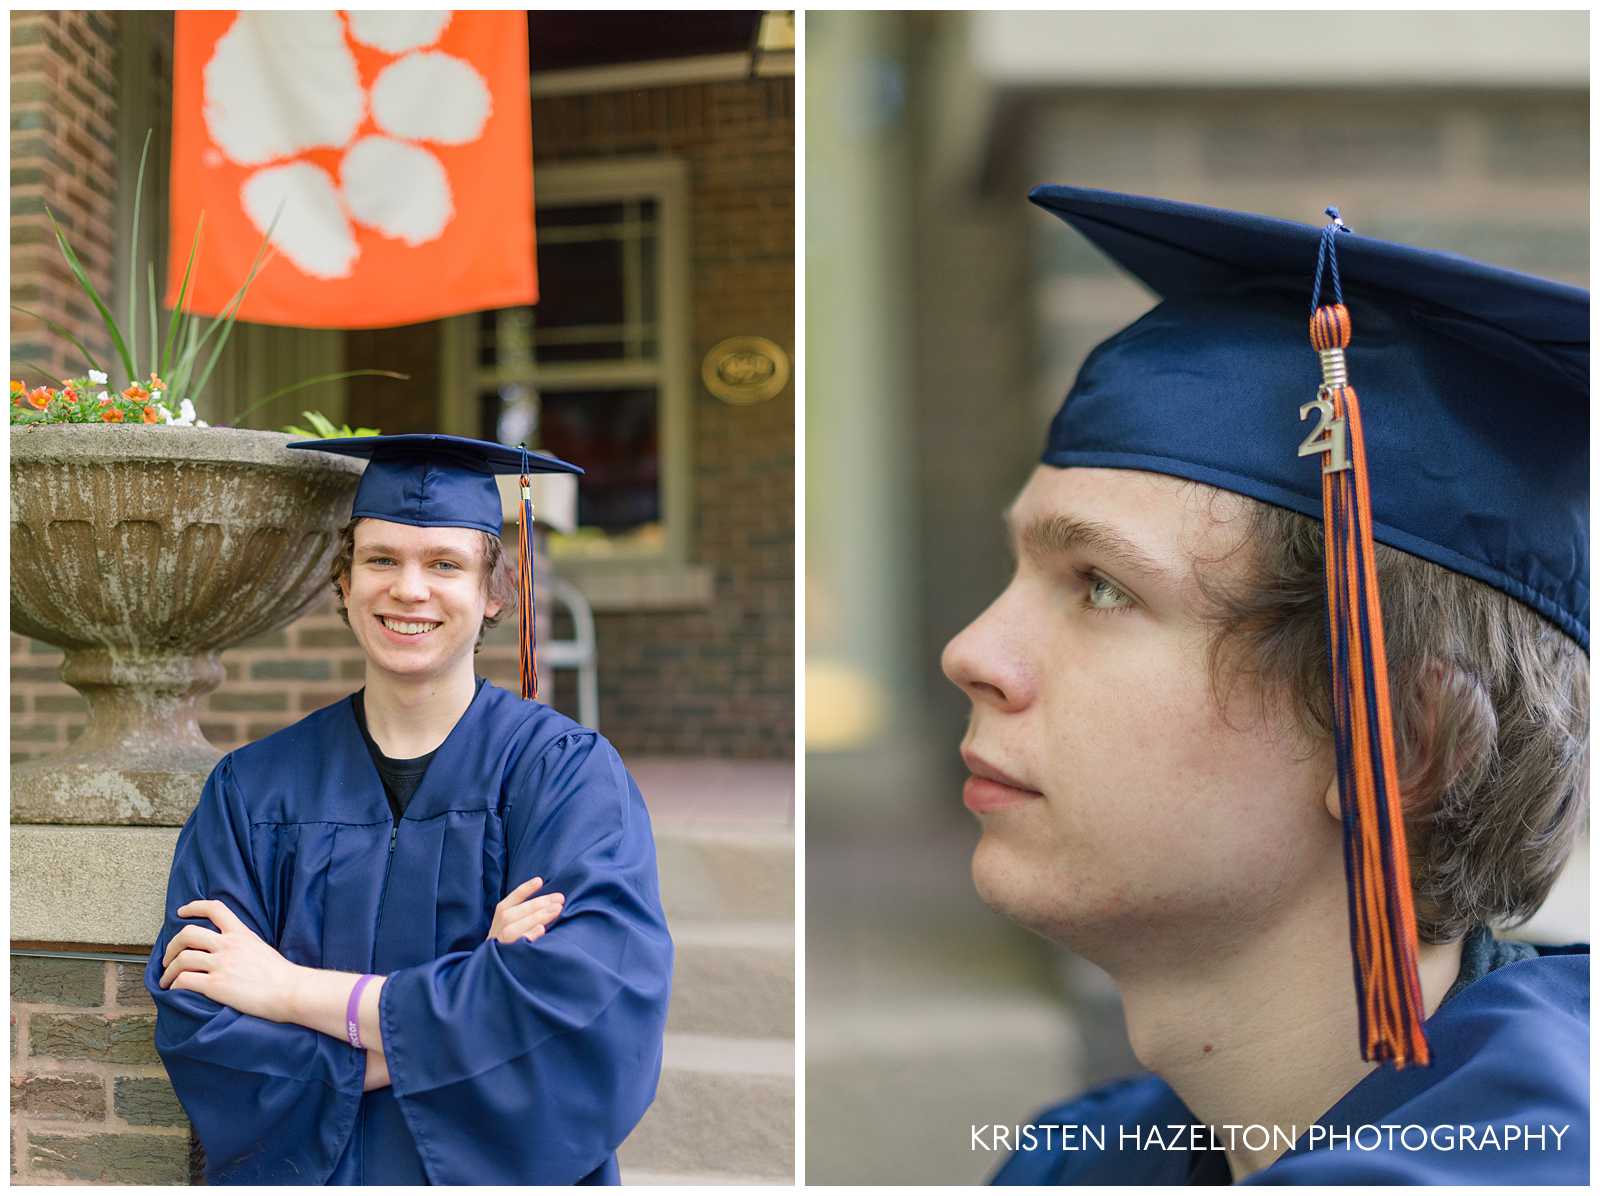 High school senior boy wearing cap and gown with university flag in the background